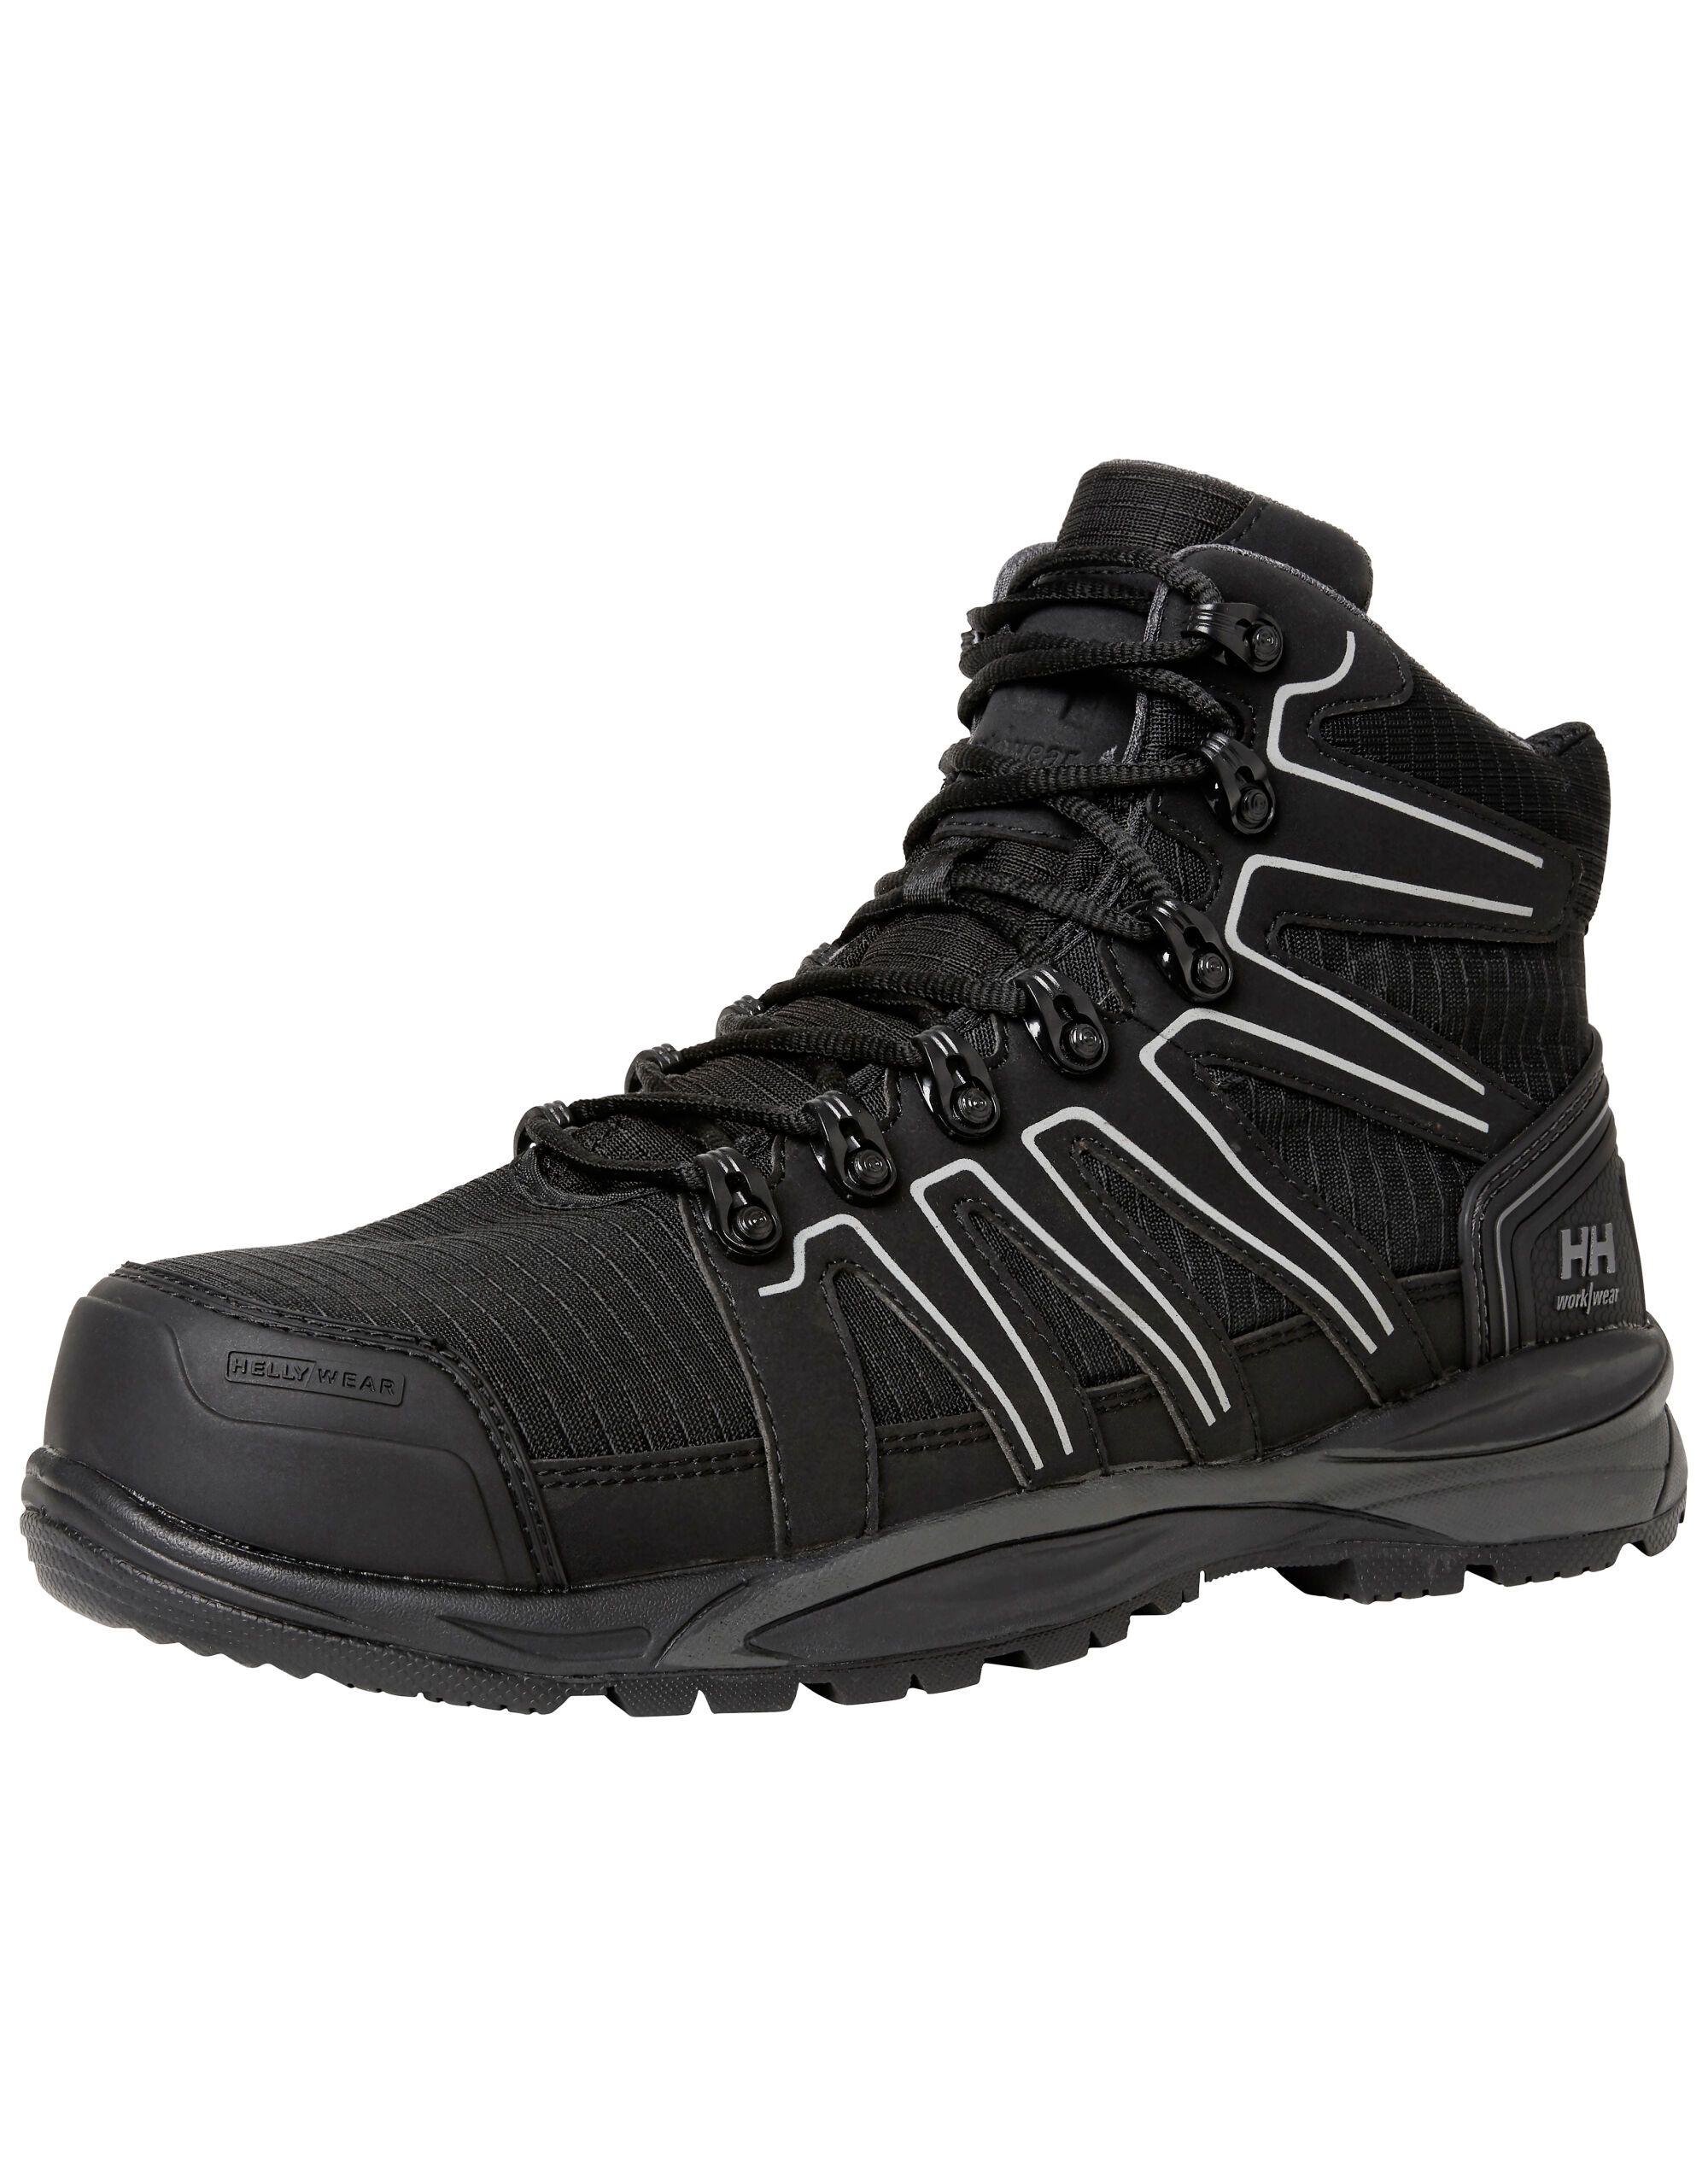 Manchester Mid S3 Safety Boot